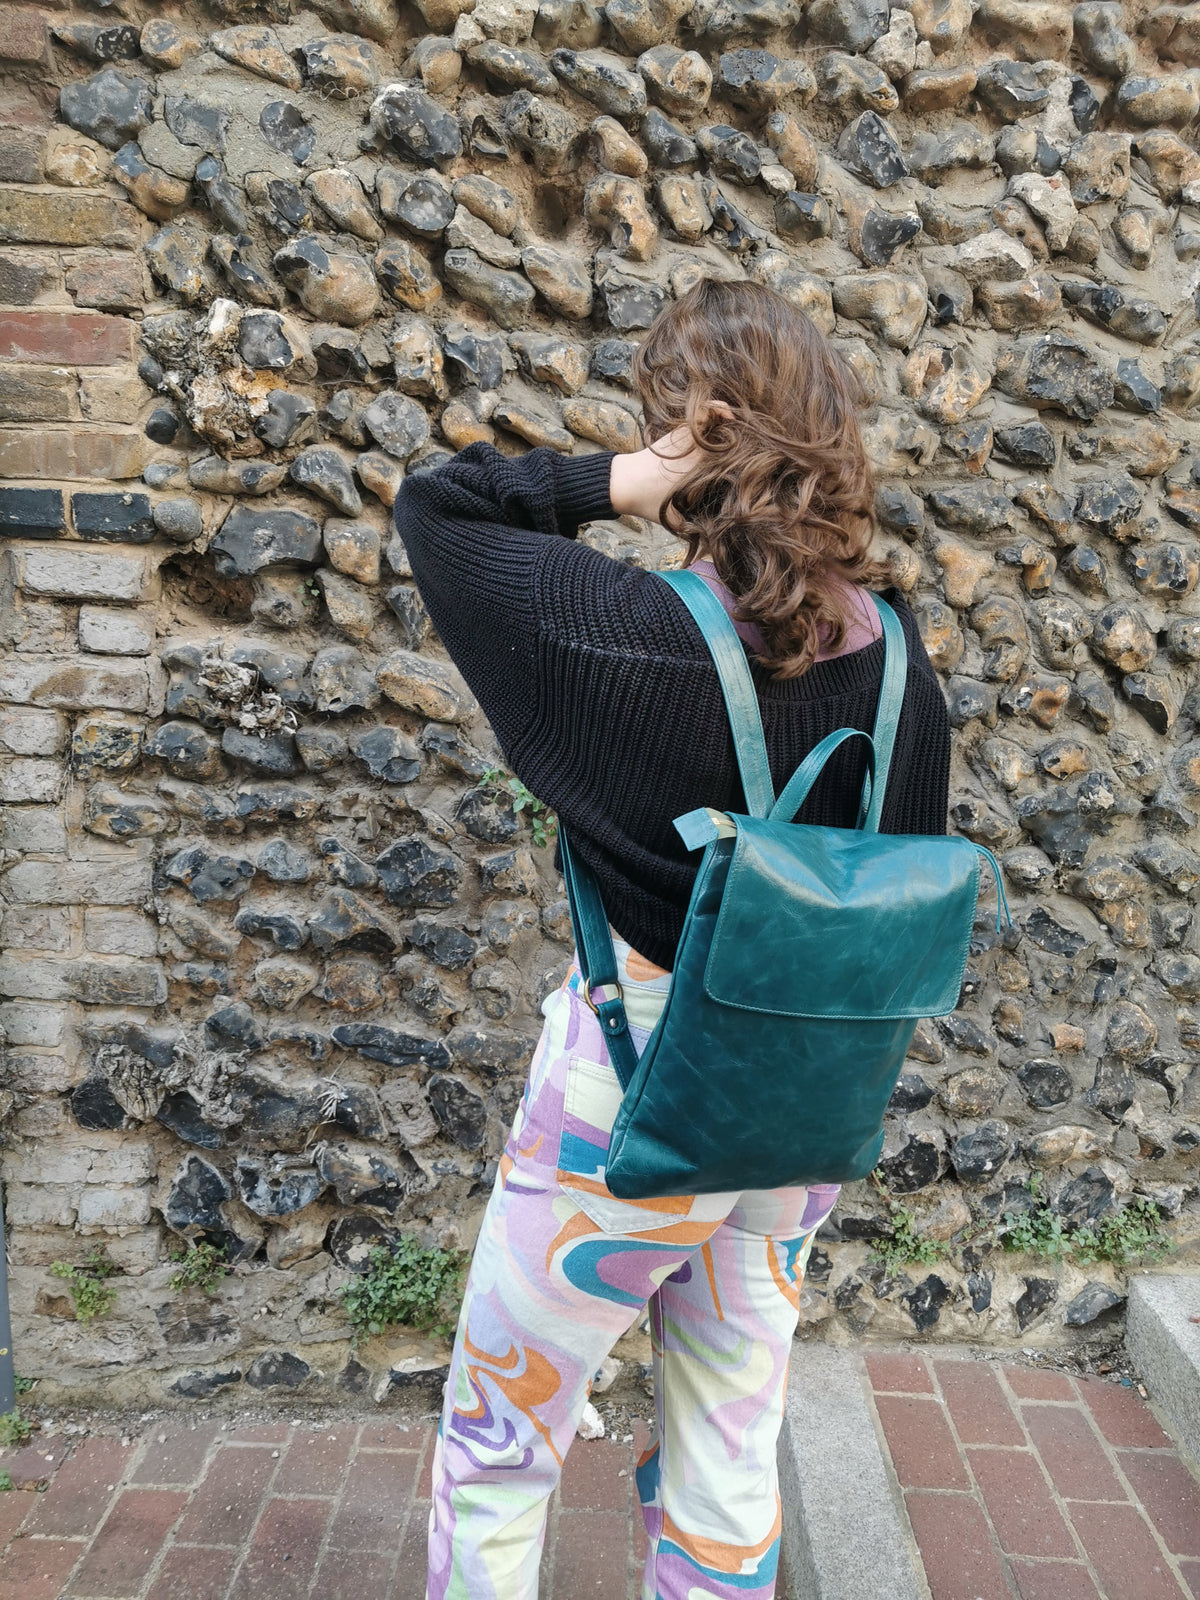 Dinky Pal rucksack in Teal Glazed Leather